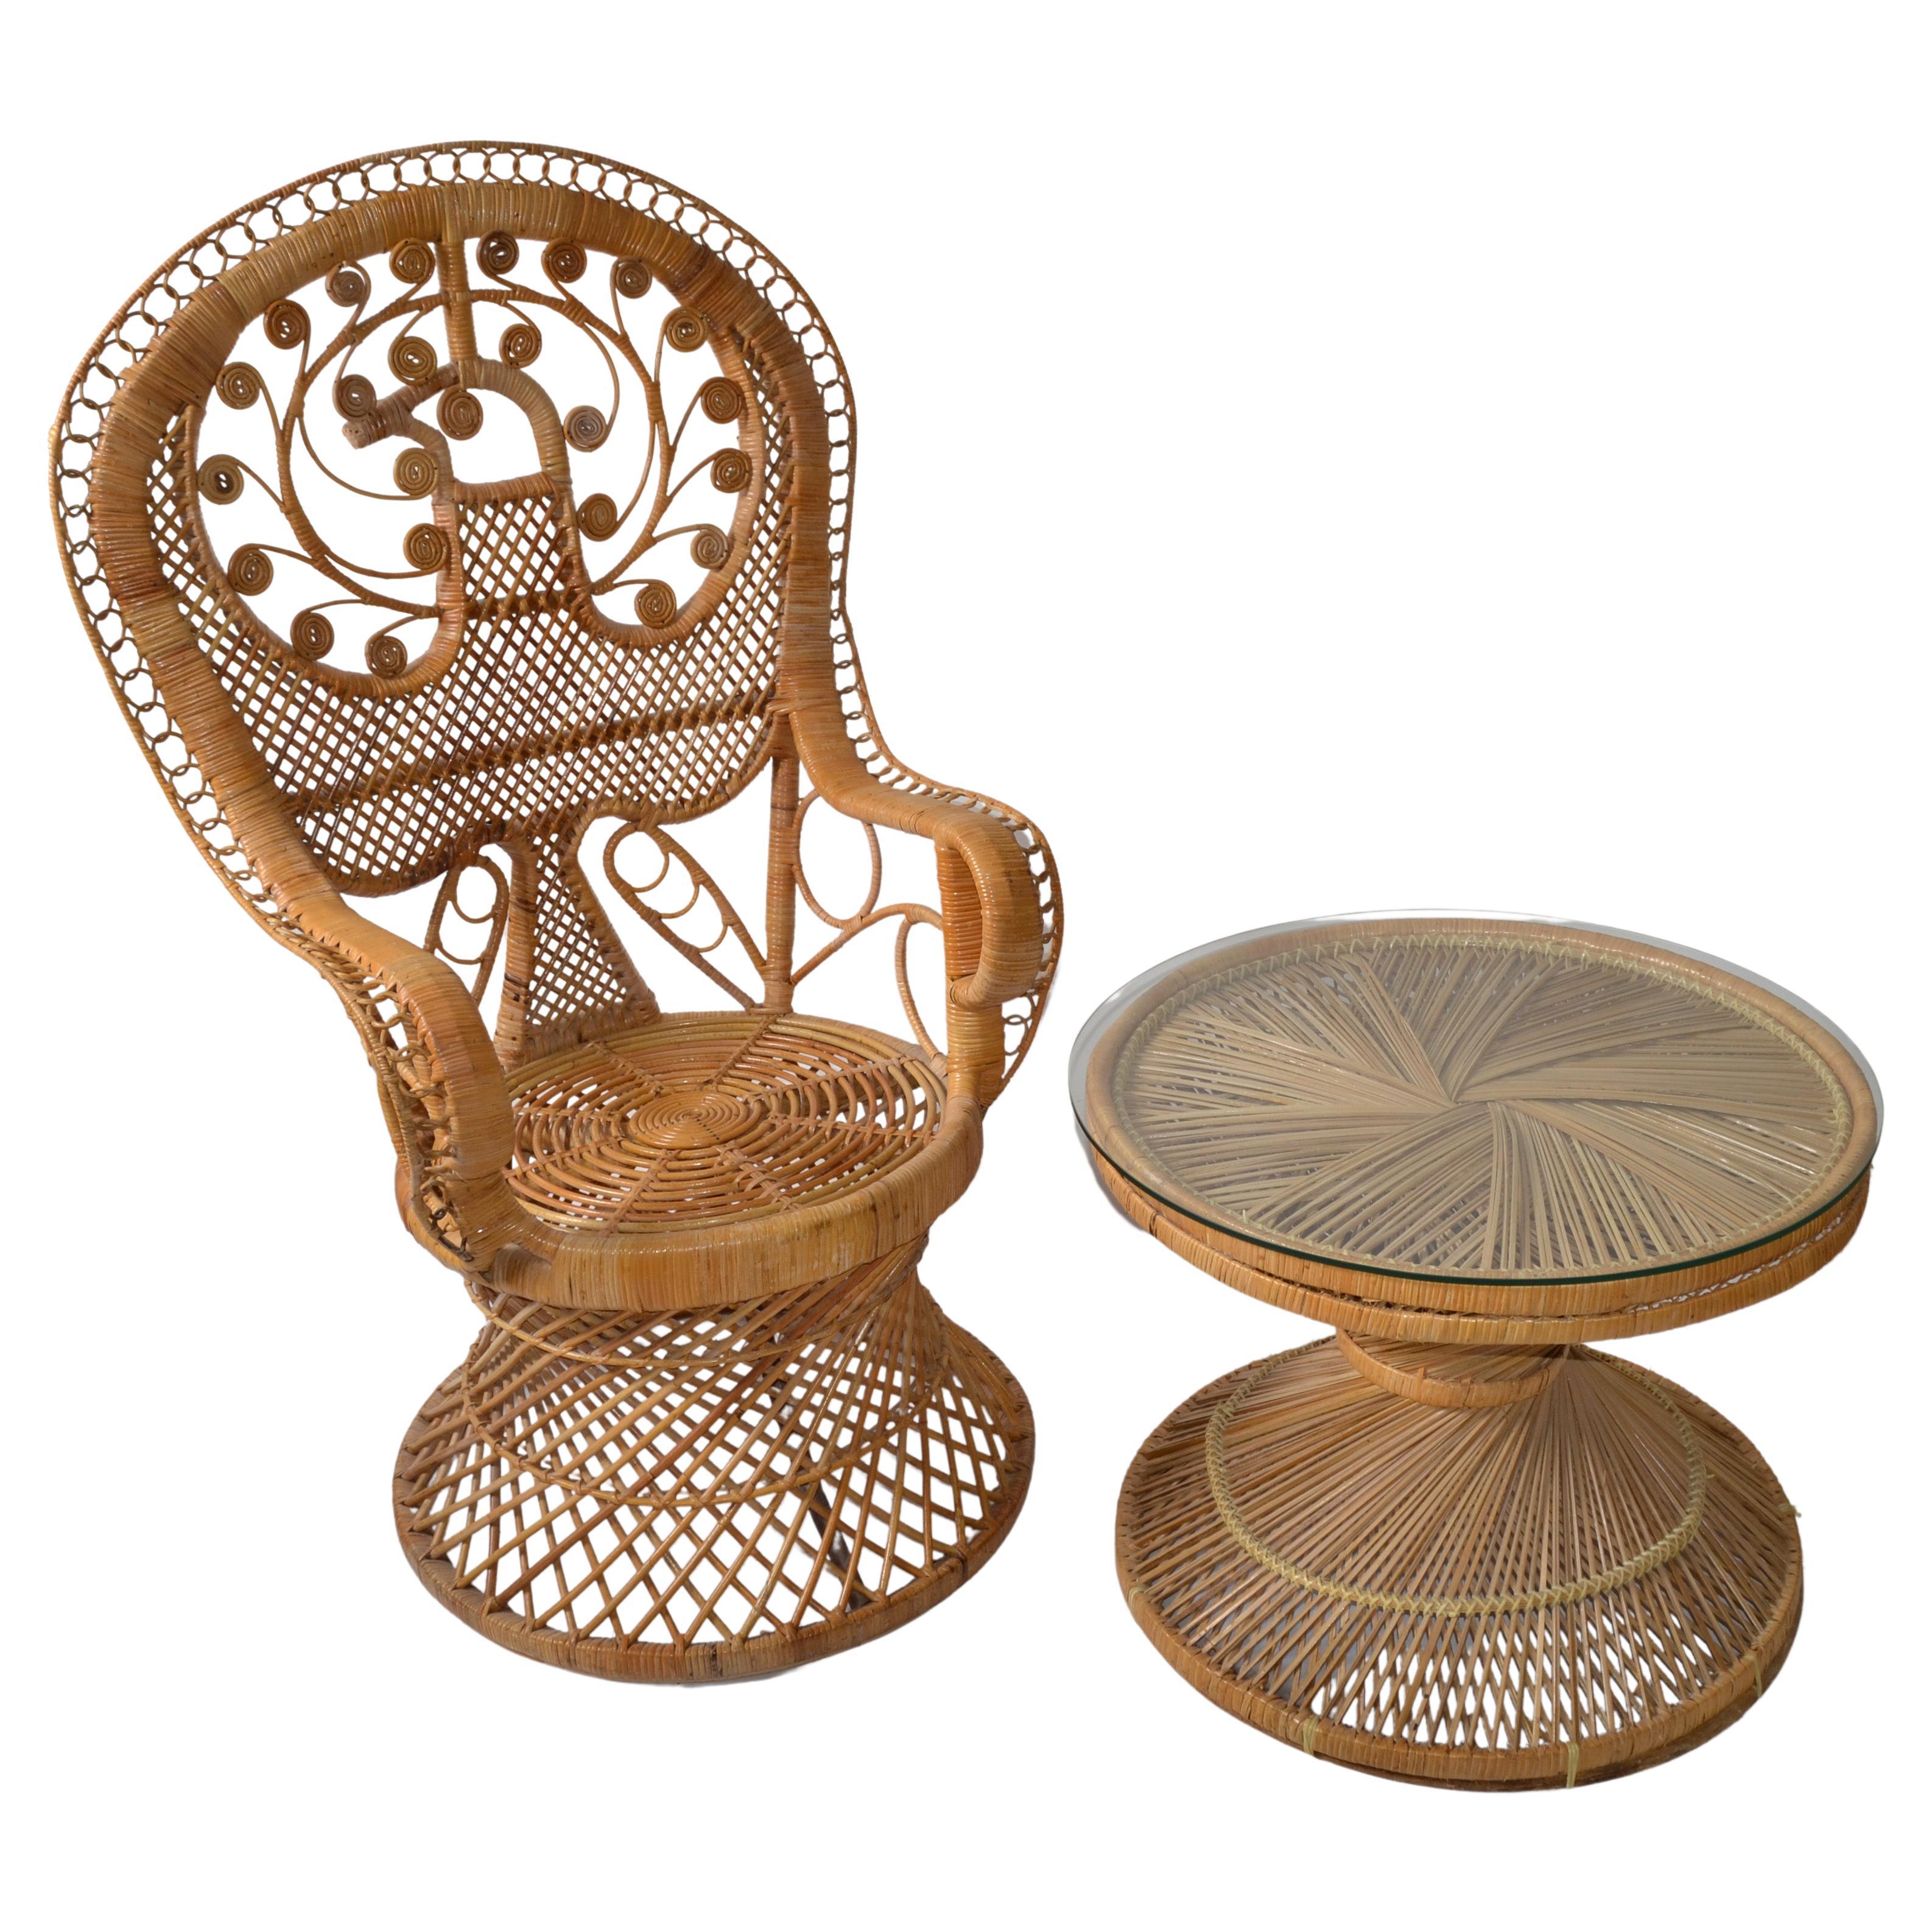 Coastal Vintage Round Rattan Accent Table Hand-Woven Wicker Caning Peacock Chair en vente